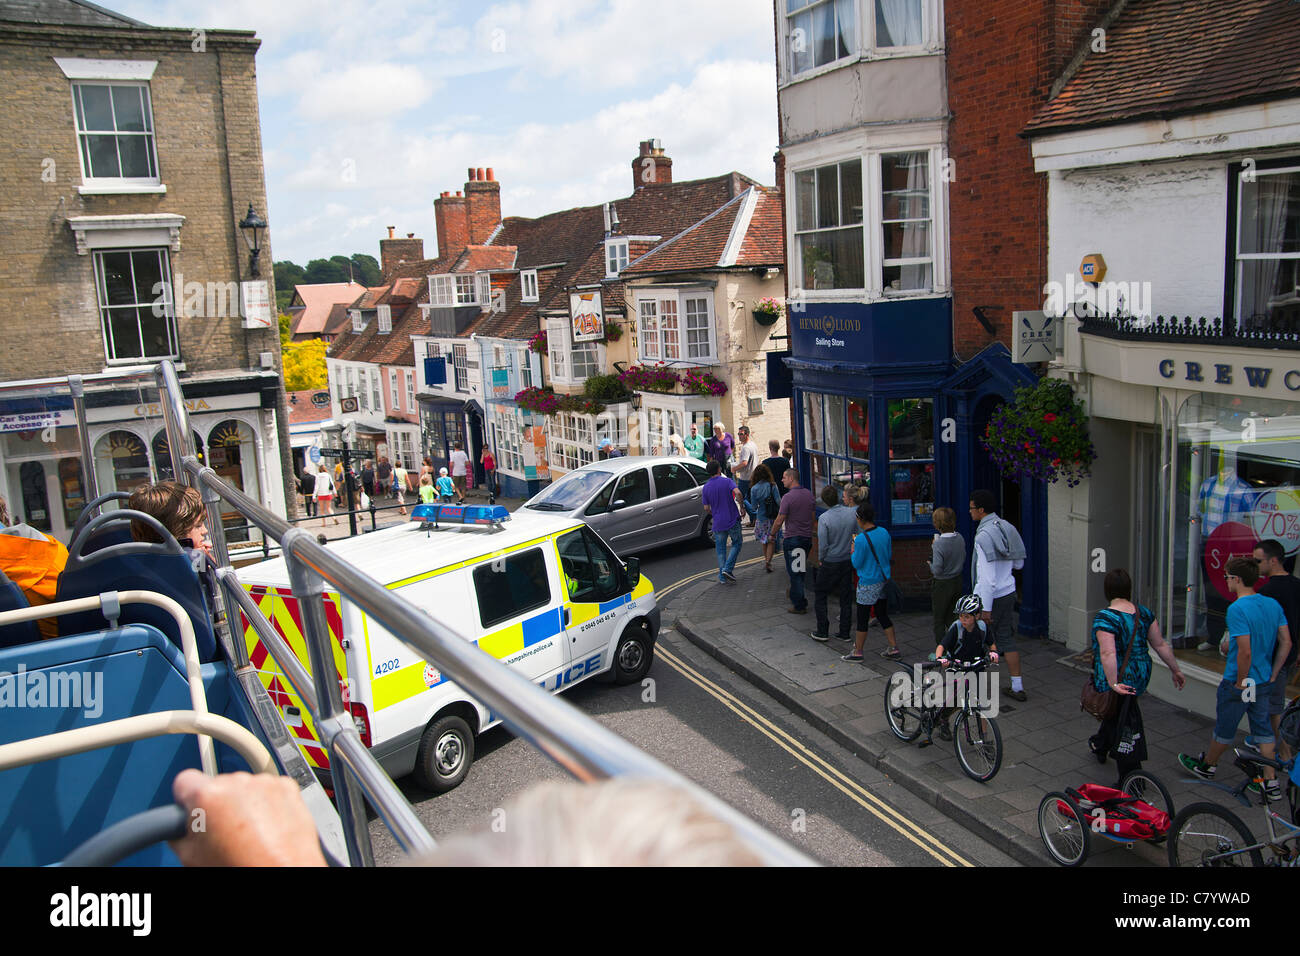 Police van blocking the road for a fire incident in Lymington High Street. Taken from an open top bus. Stock Photo